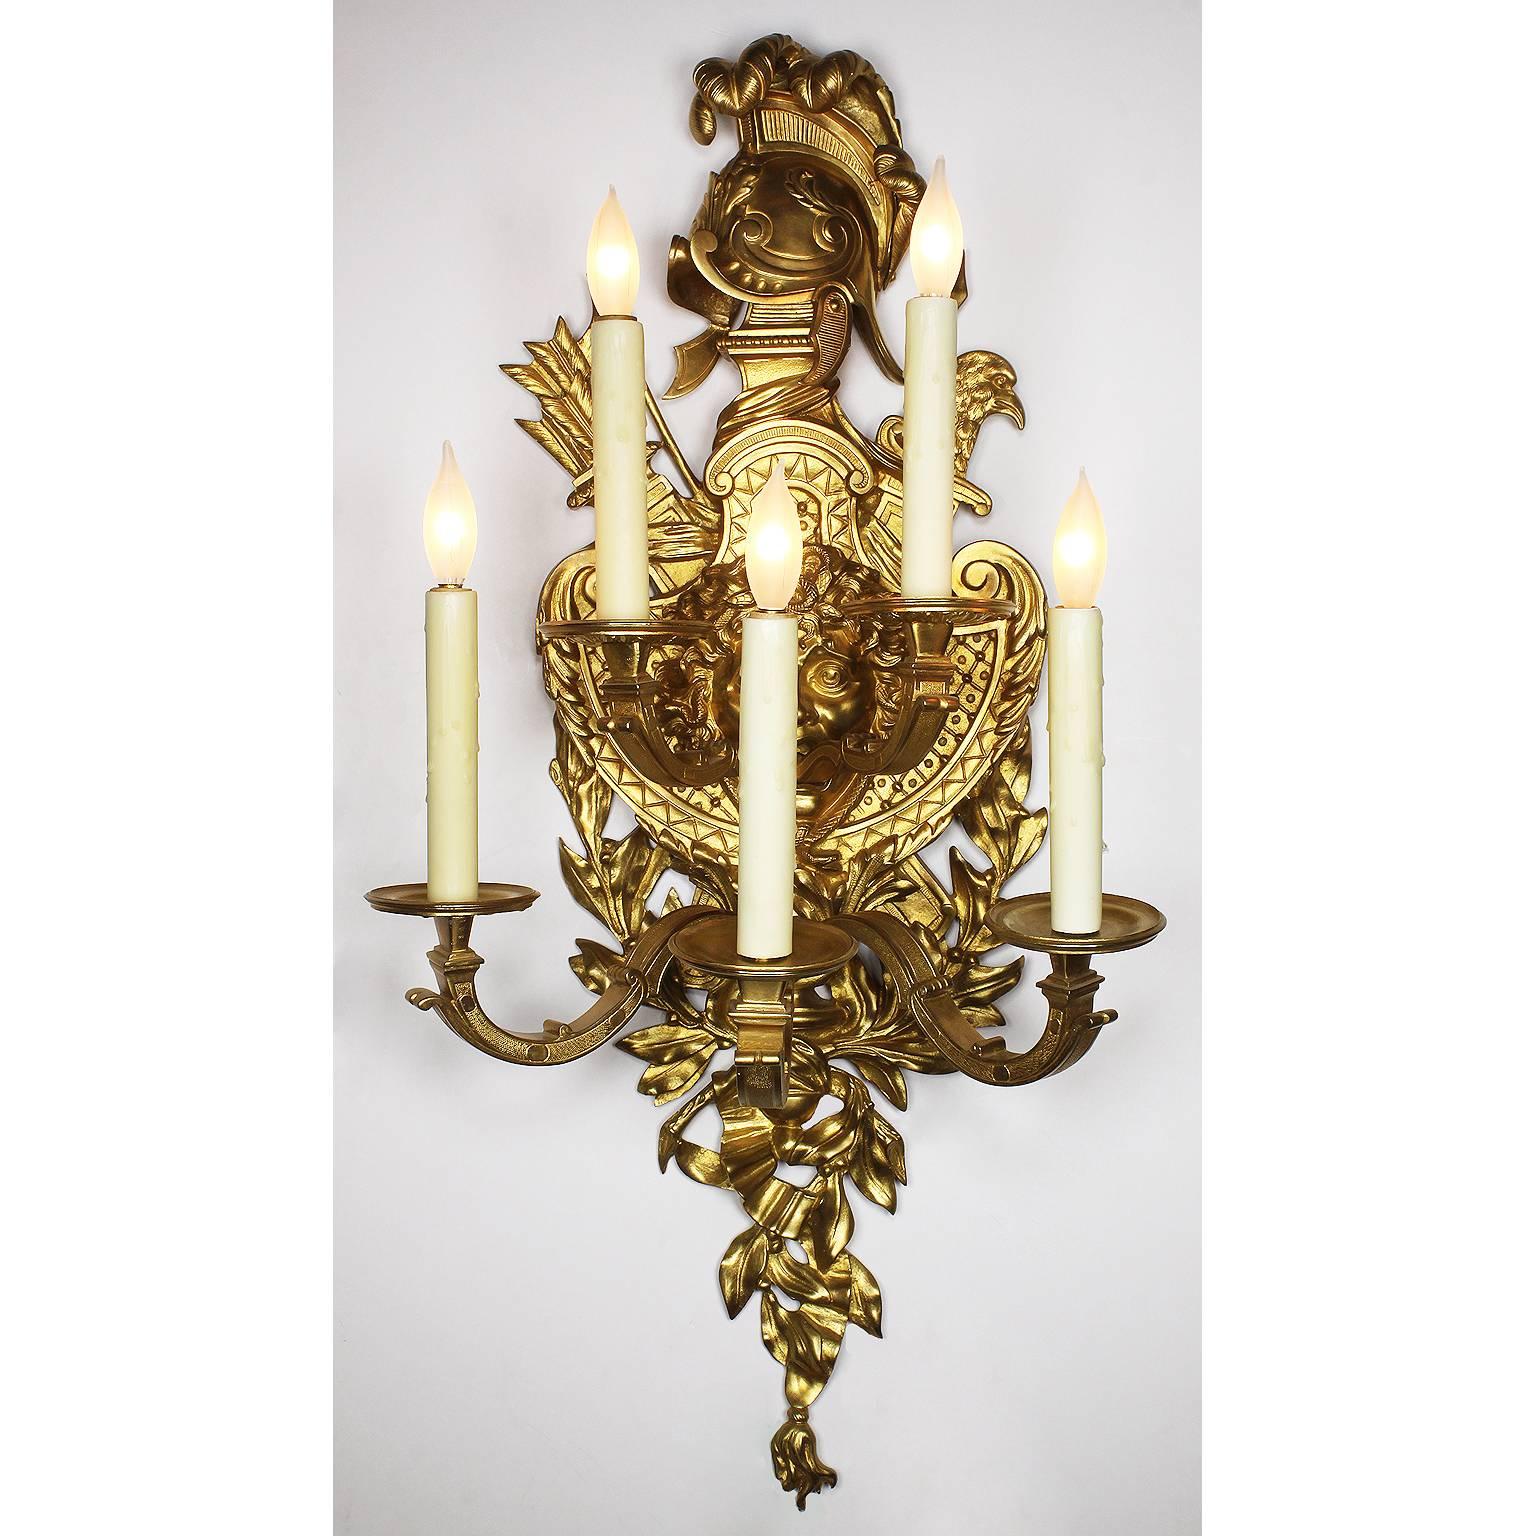 A pair of French 19th-20th century Regence style gilt bronze five-light figural wall lights, each with a ribbon-tied back-plate suspending a plumed helmet and centred by a Medusa mask shield with military trophies issuing two acanthus cast